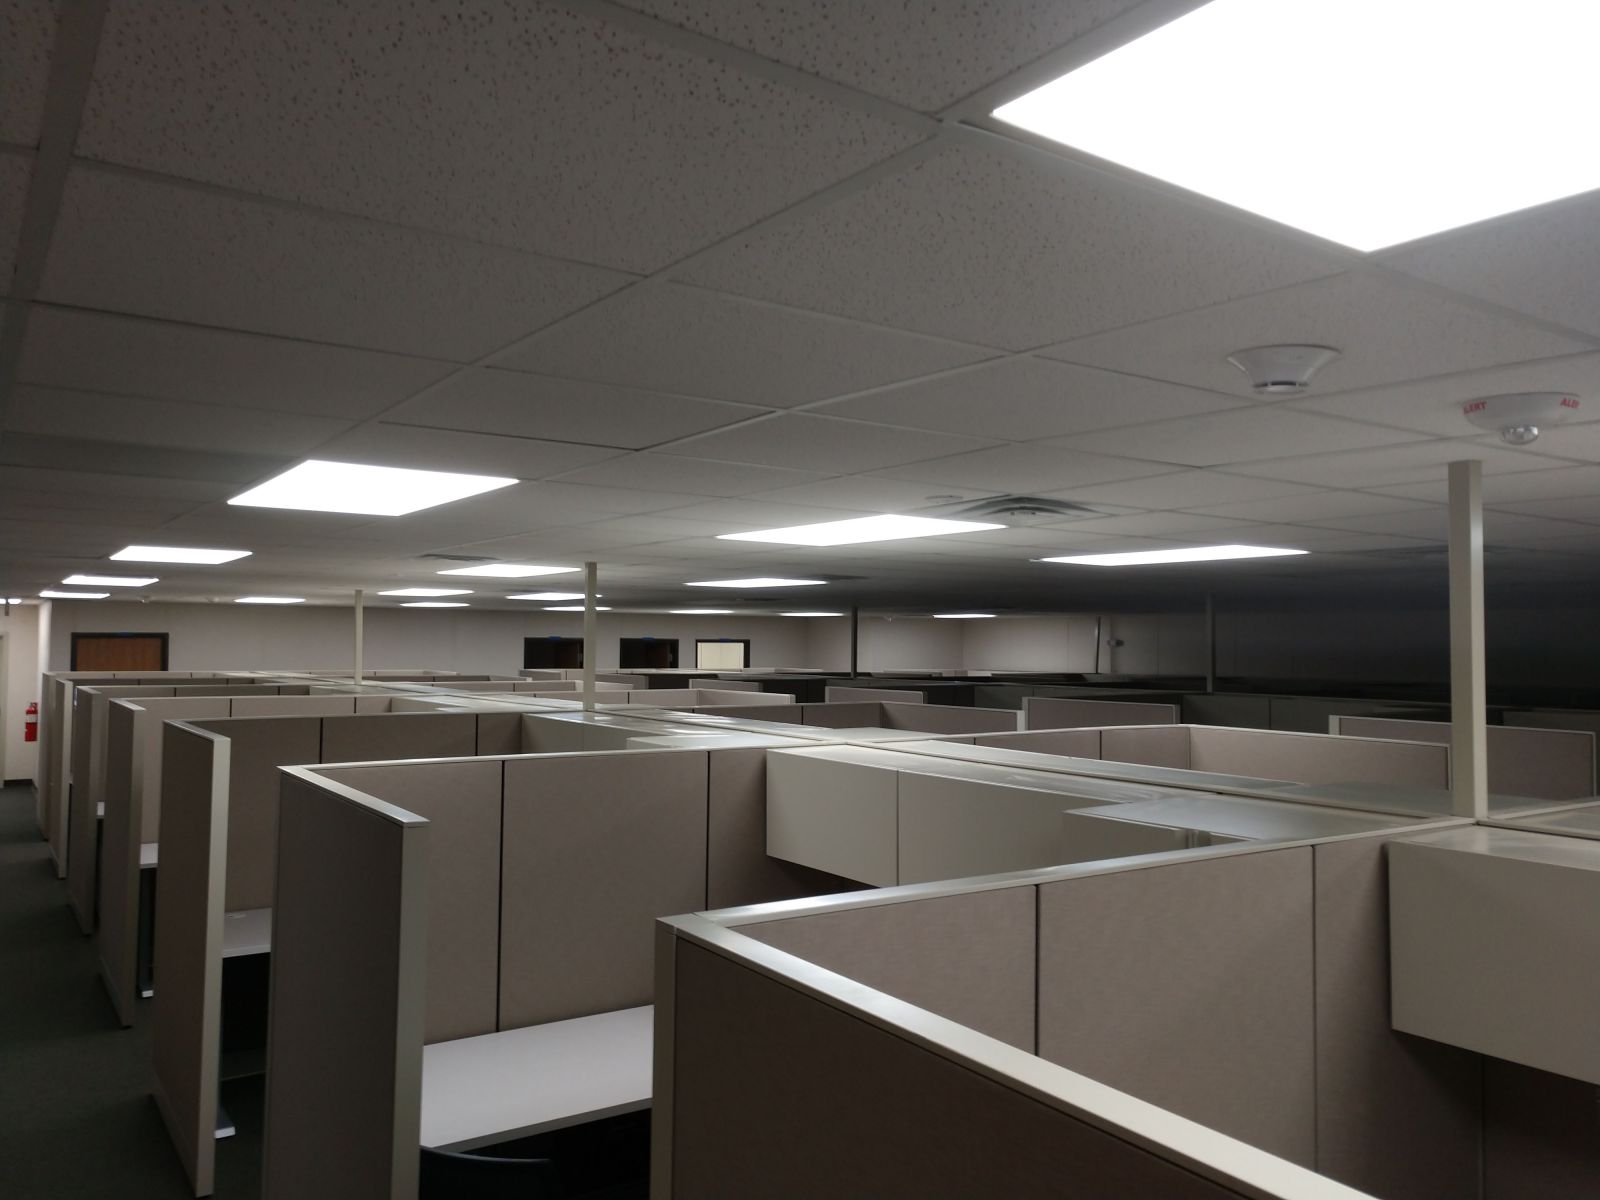 Administrative-Modular-Swing-Space-Cubicles-1